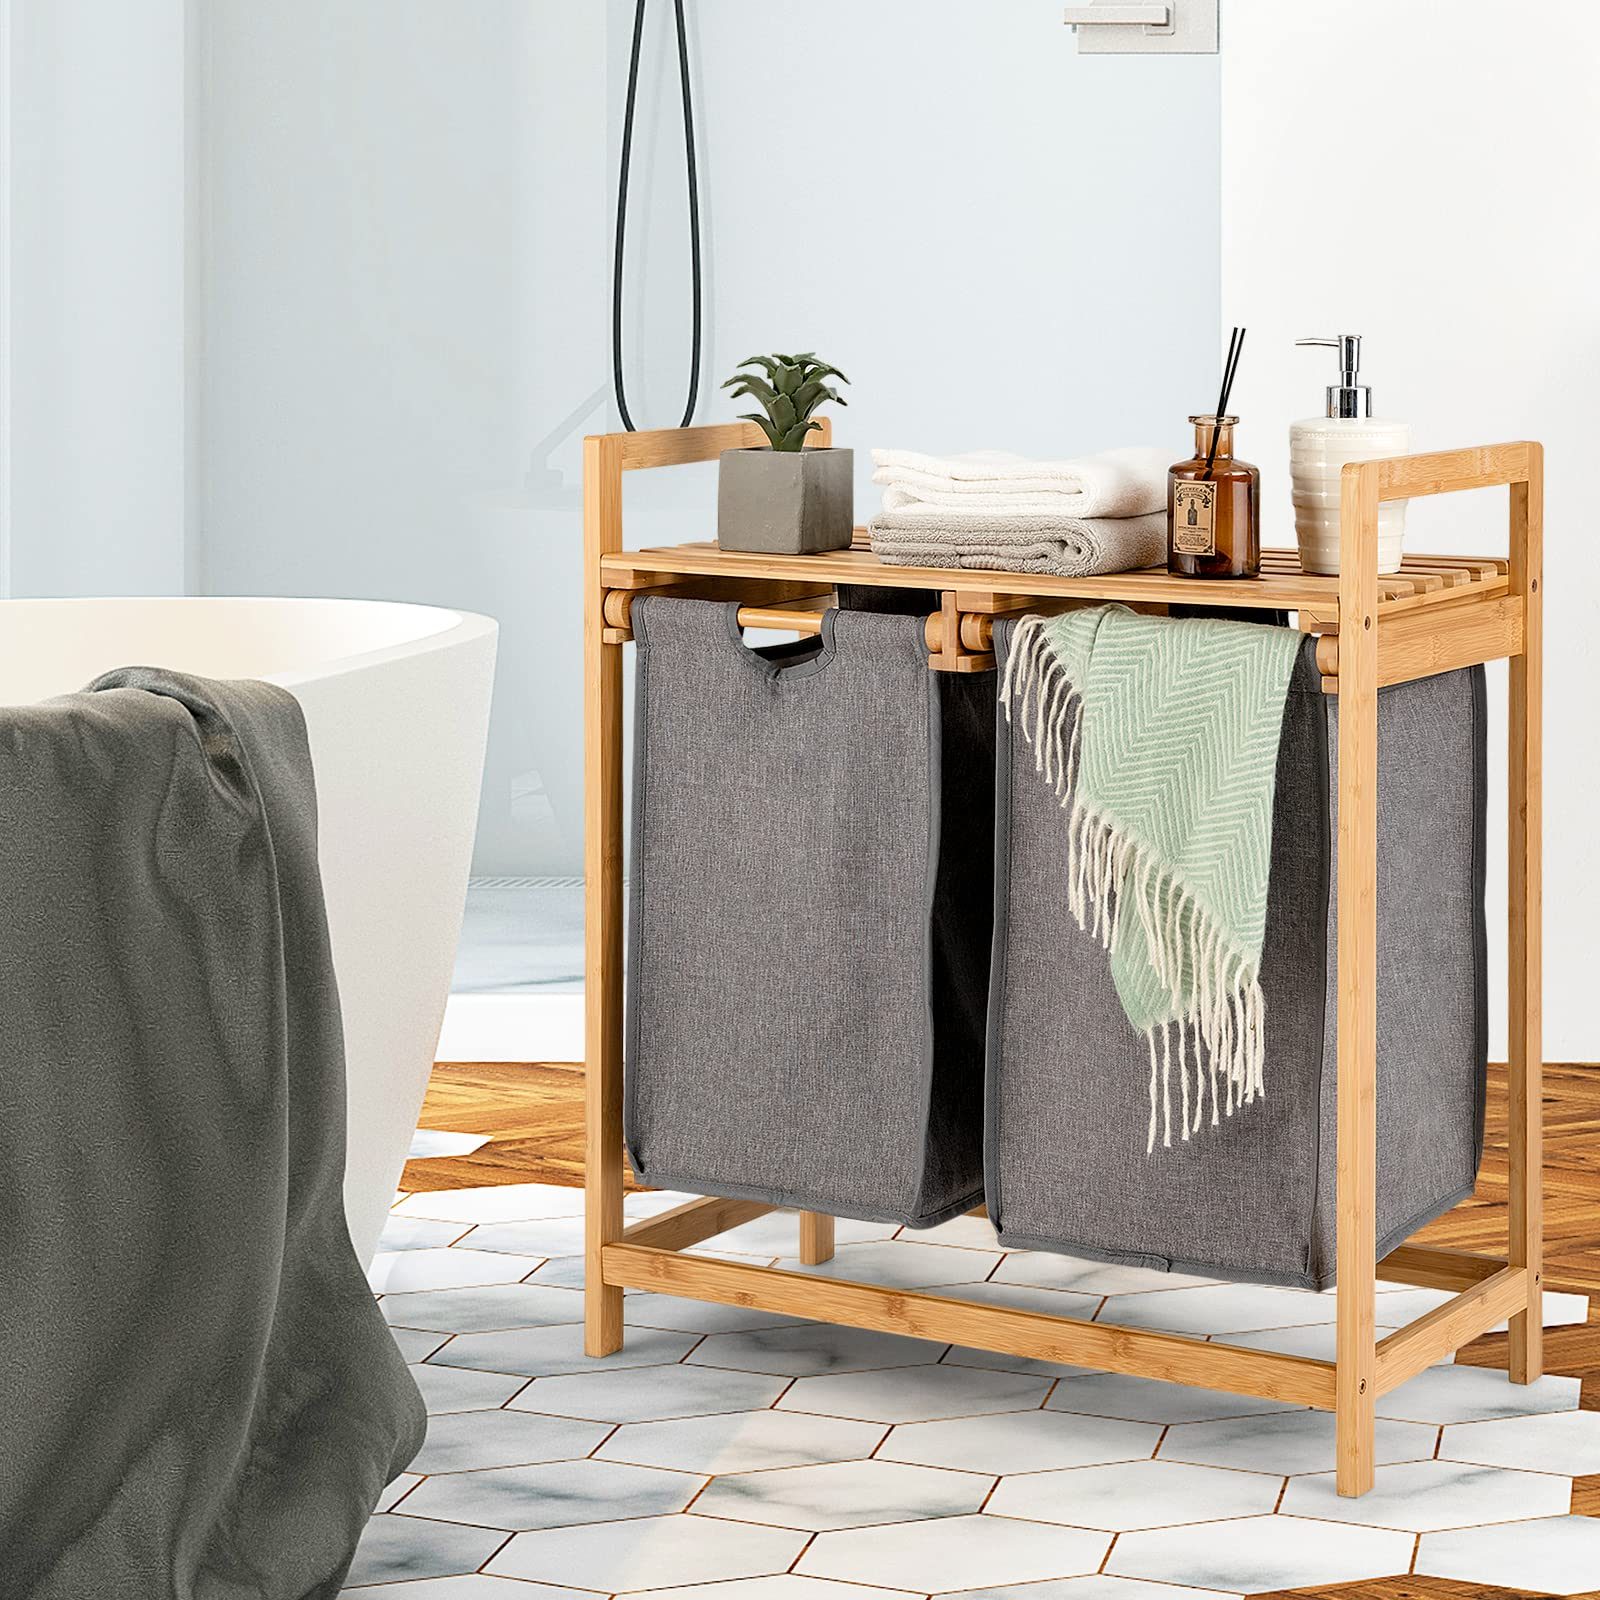 Bamboo Laundry Hamper with Dual Compartments